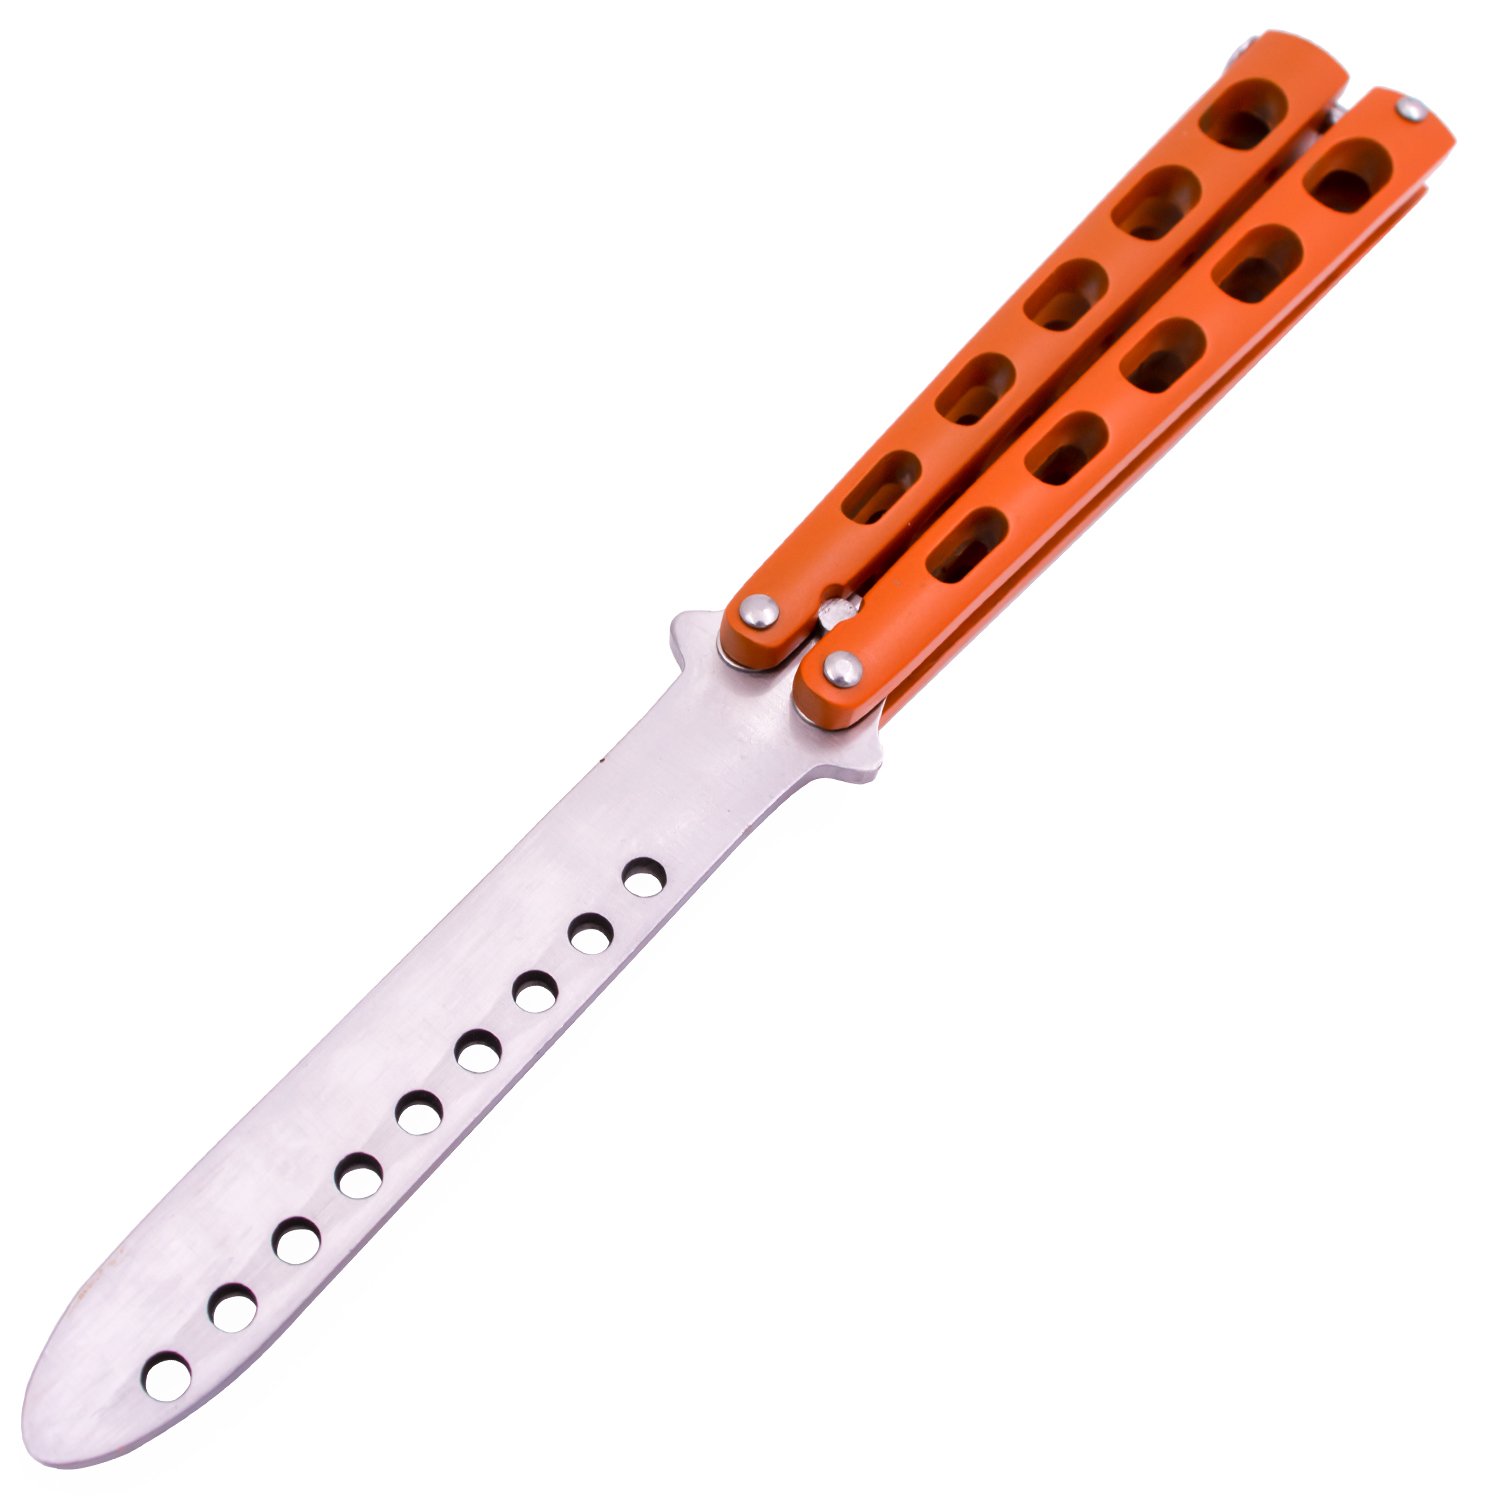 Tiger USA Butterfly Training Knife 440 Stainless 8.85 Inch   Orange Picture 1